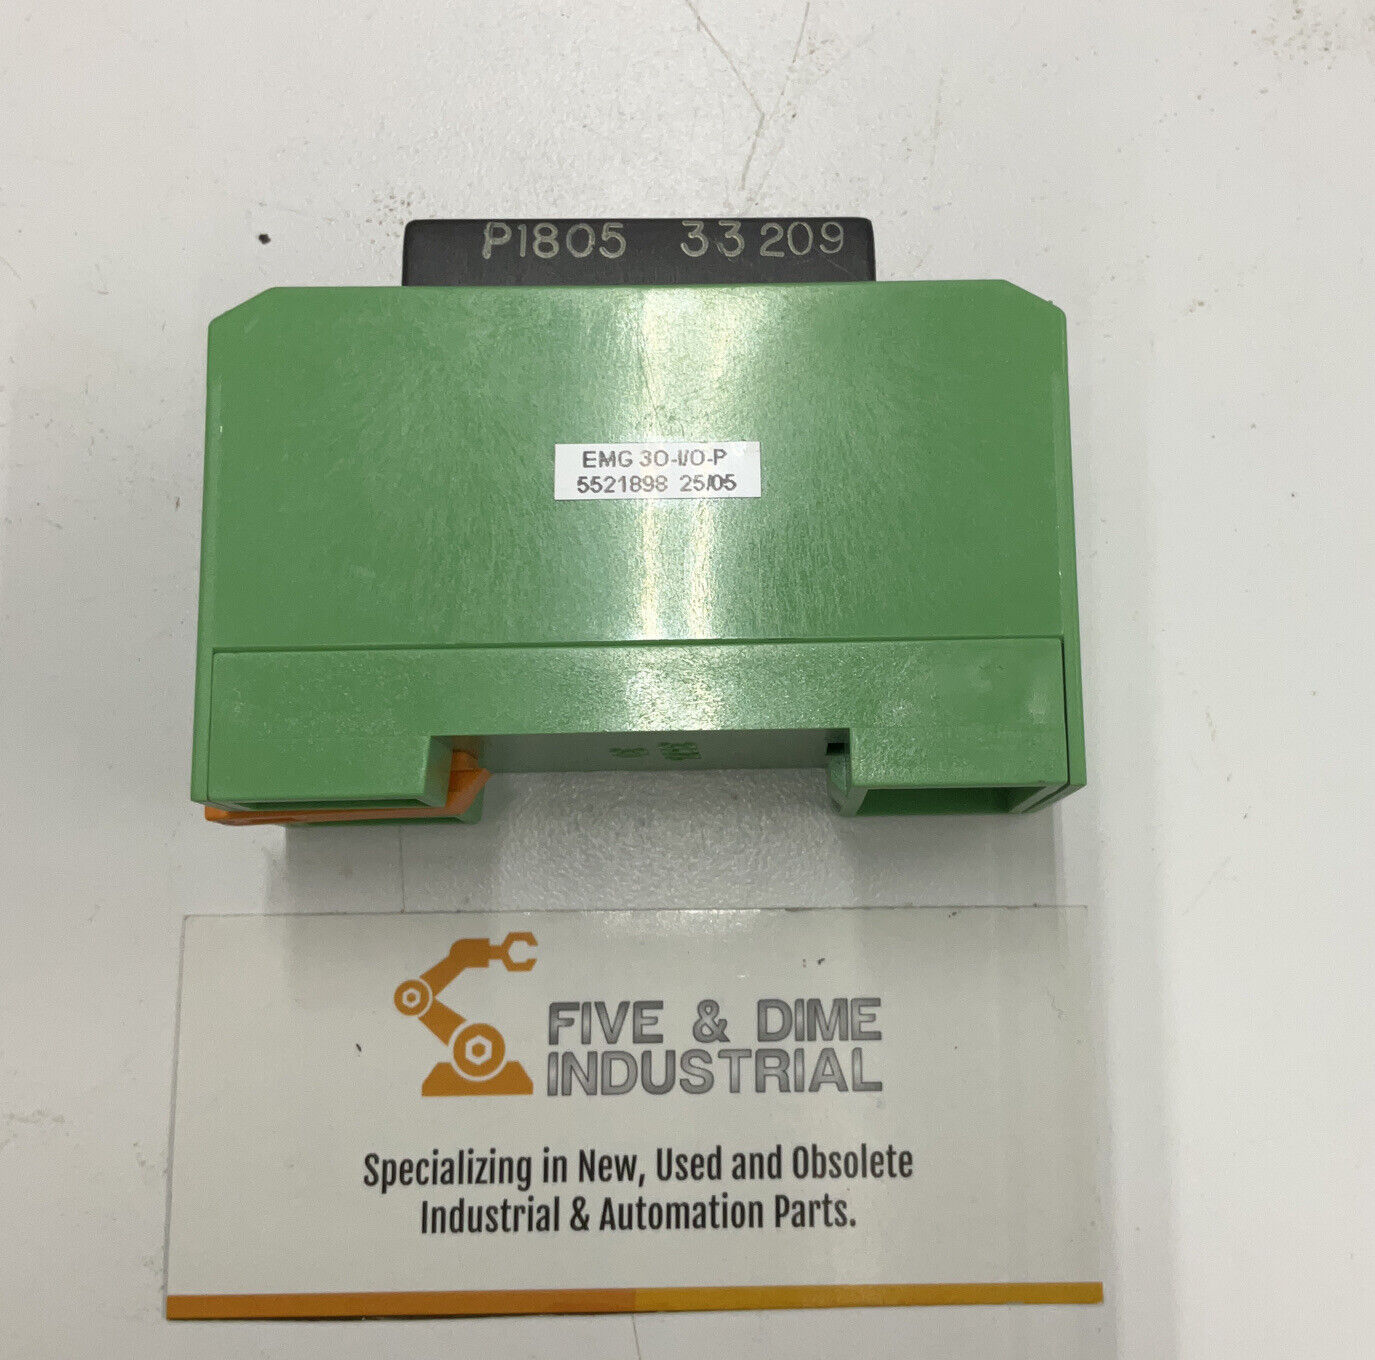 Phoenix Contact EMG 30-I/O-P Relay Base w/ Solid State Relay 2904010 (CL162) - 0